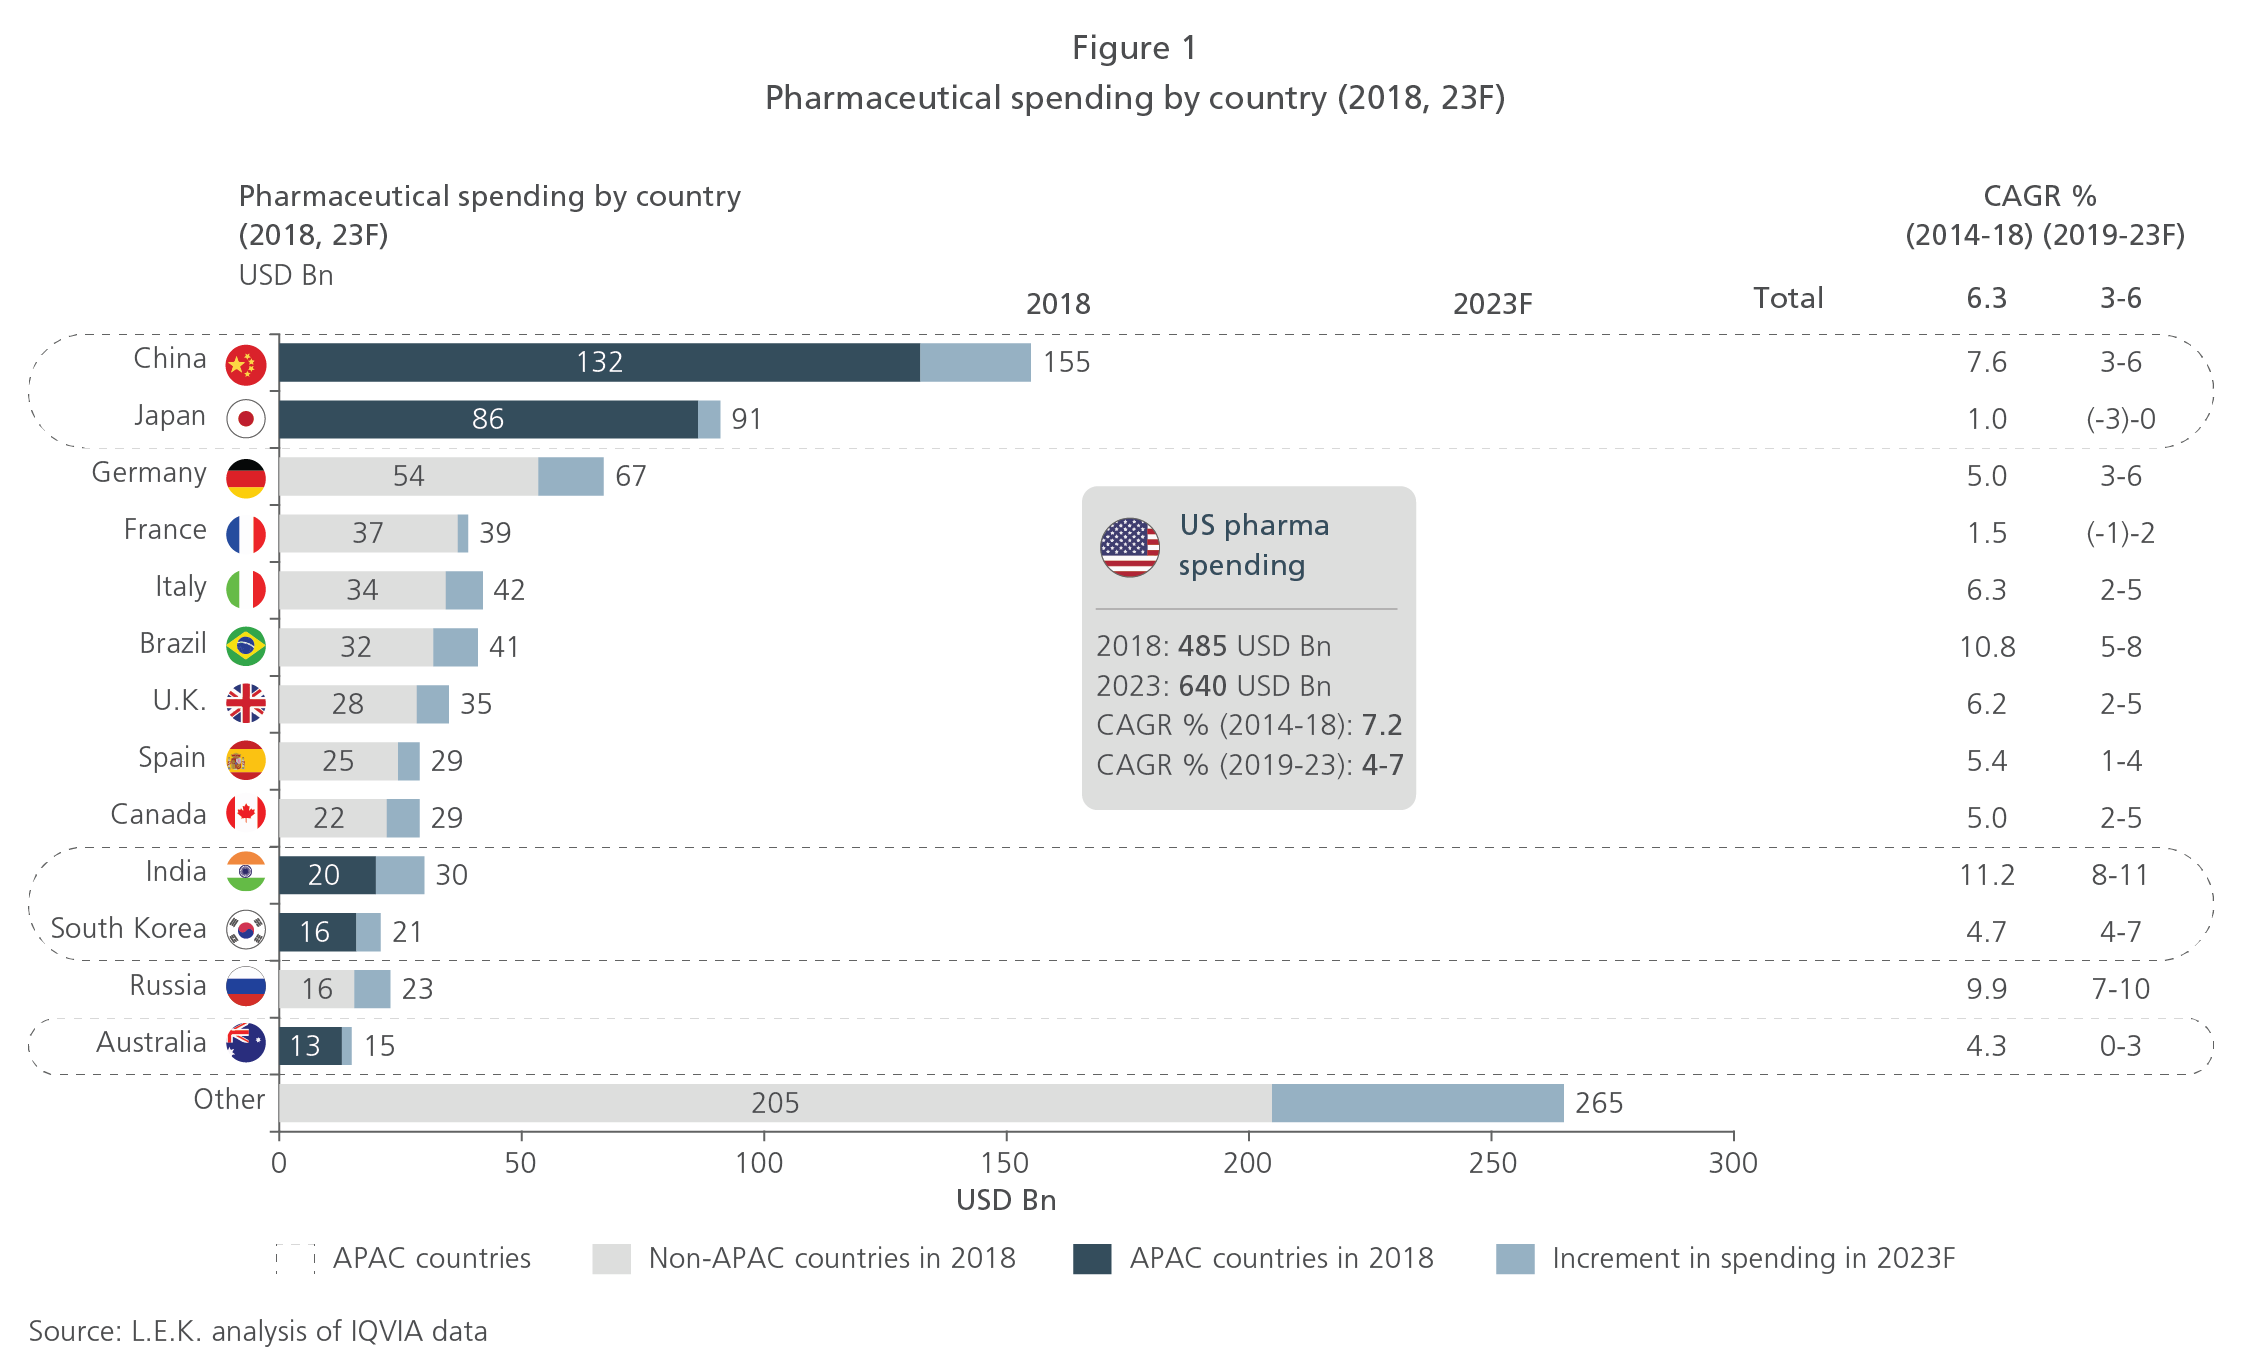 Pharmaceutical spending by country 2018, 2023